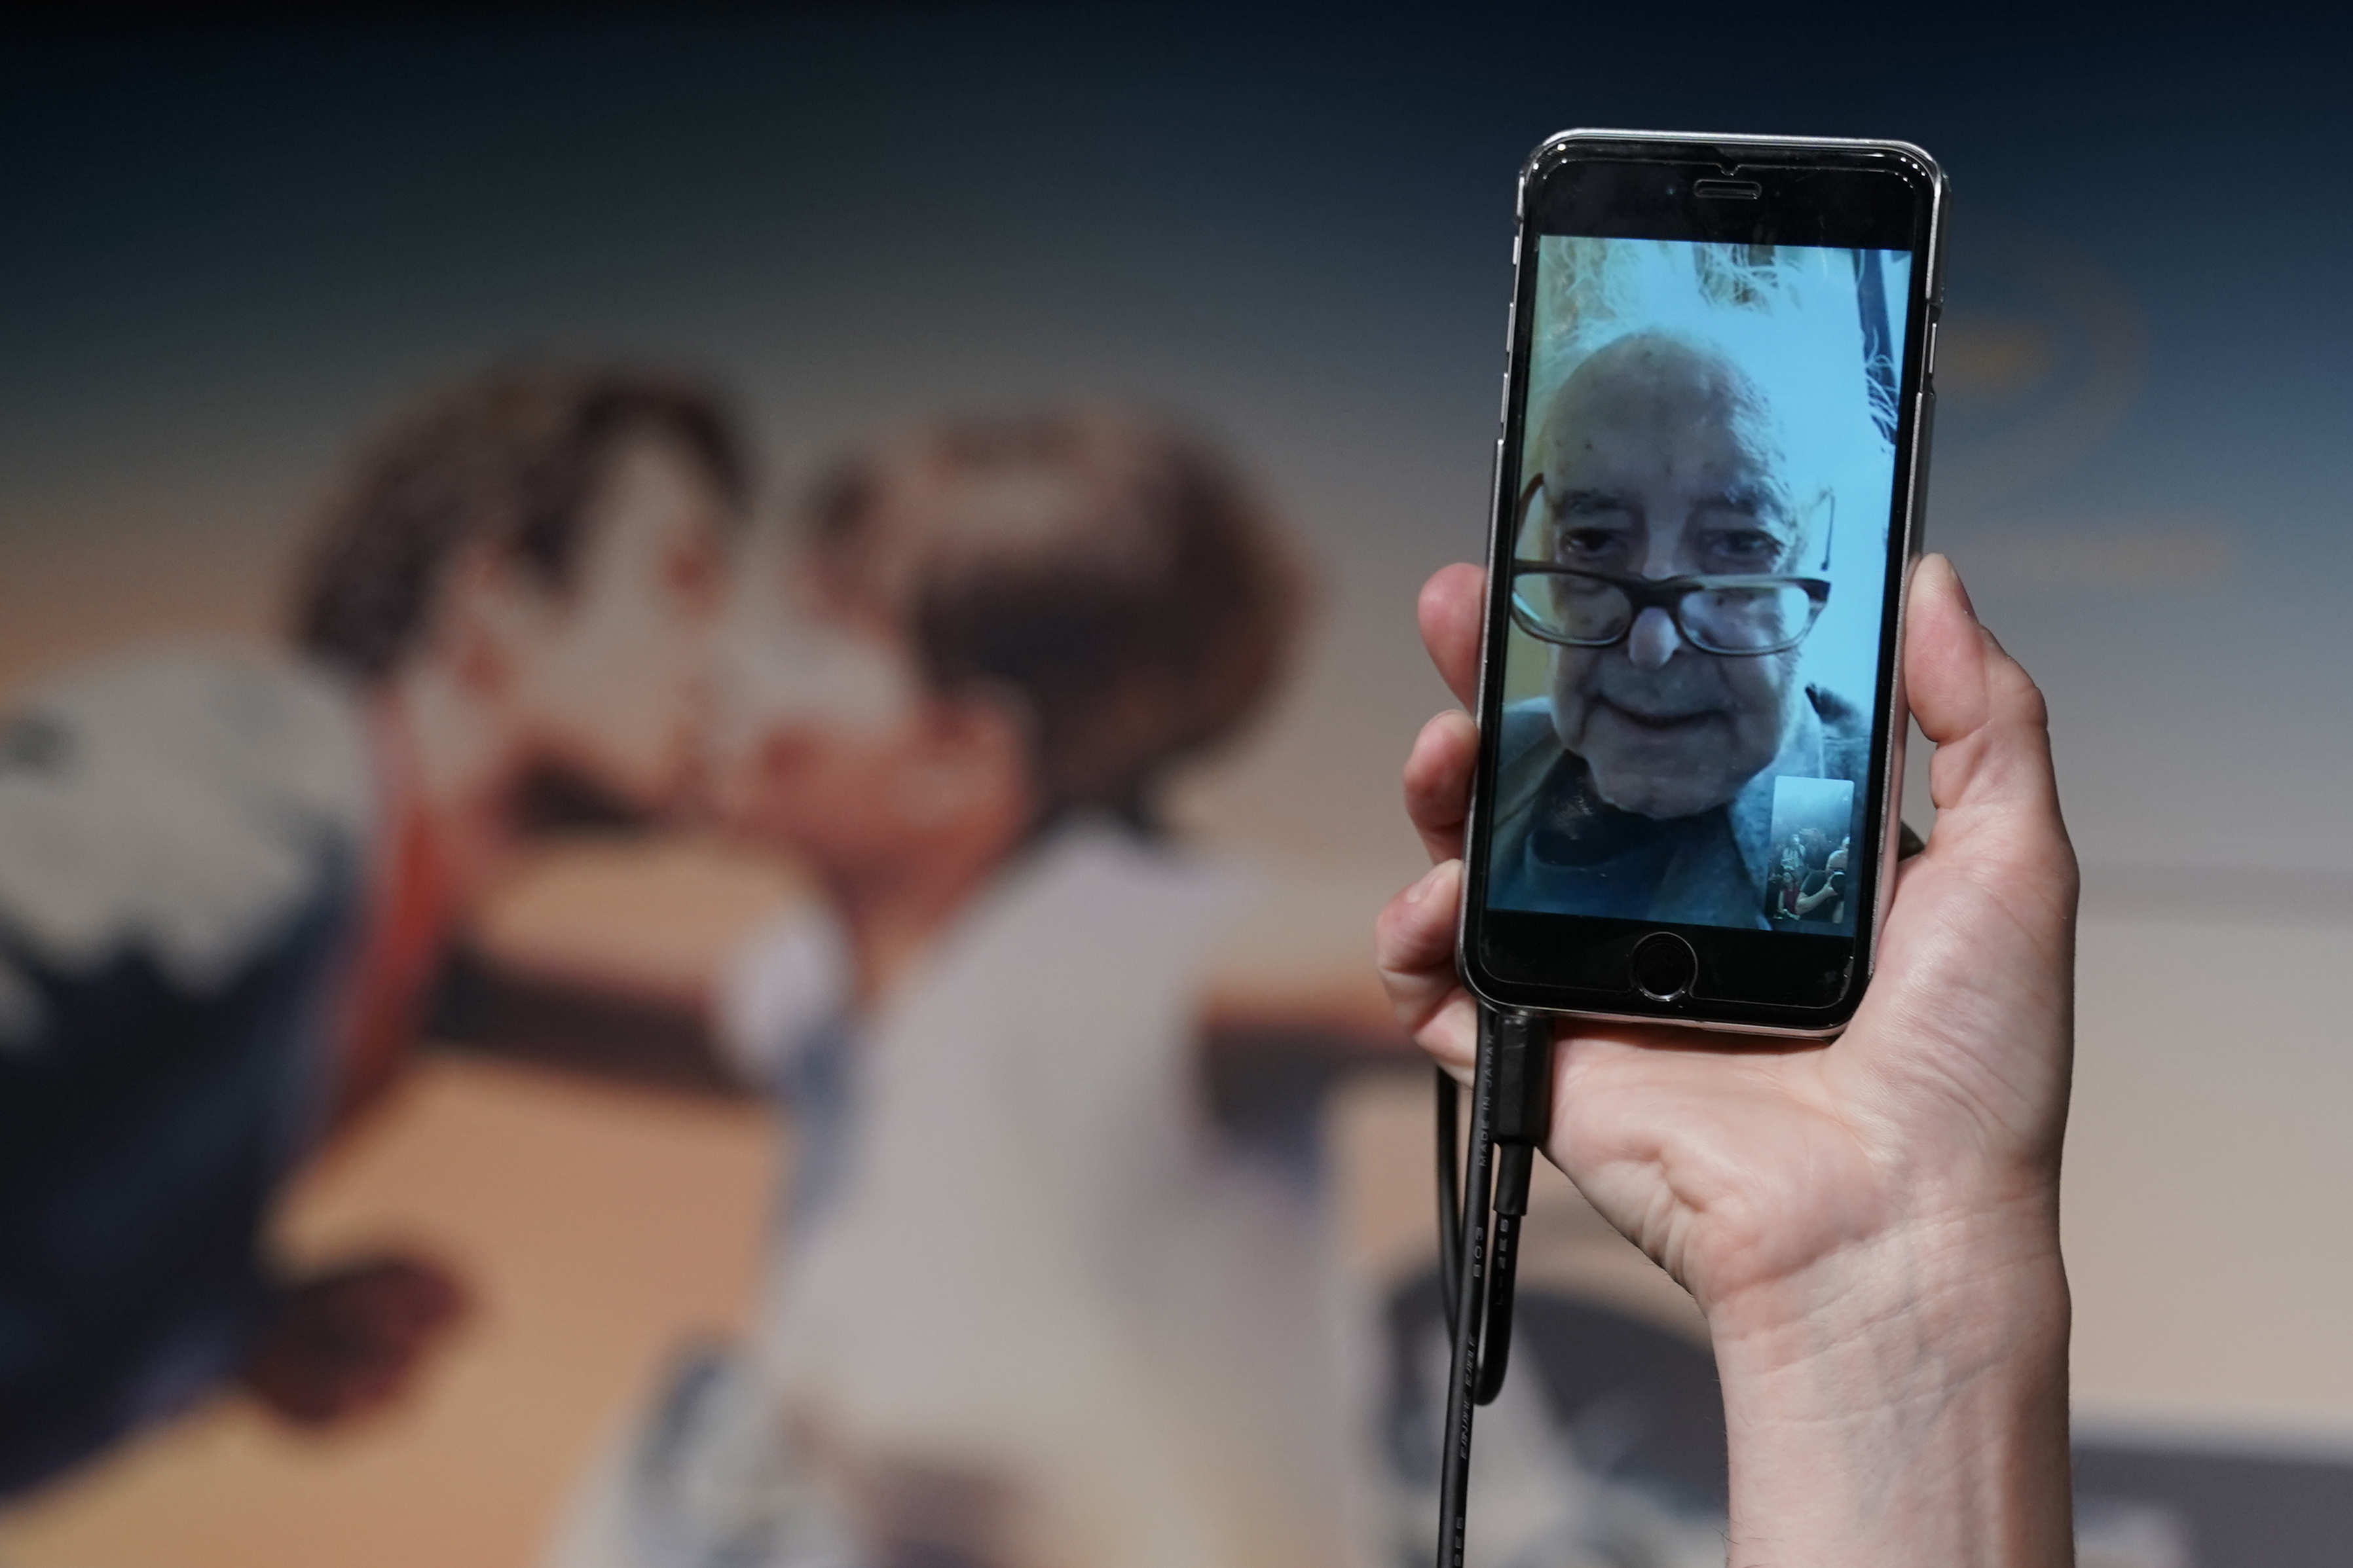 Director Jean-Luc Godard addresses a press conference through a mobile phone video link, from his home in Switzerland, on May 12, 2018 at the 71st Cannes Film Festival in southern France. (LAURENT EMMANUEL&mdash;AFP/Getty Images)